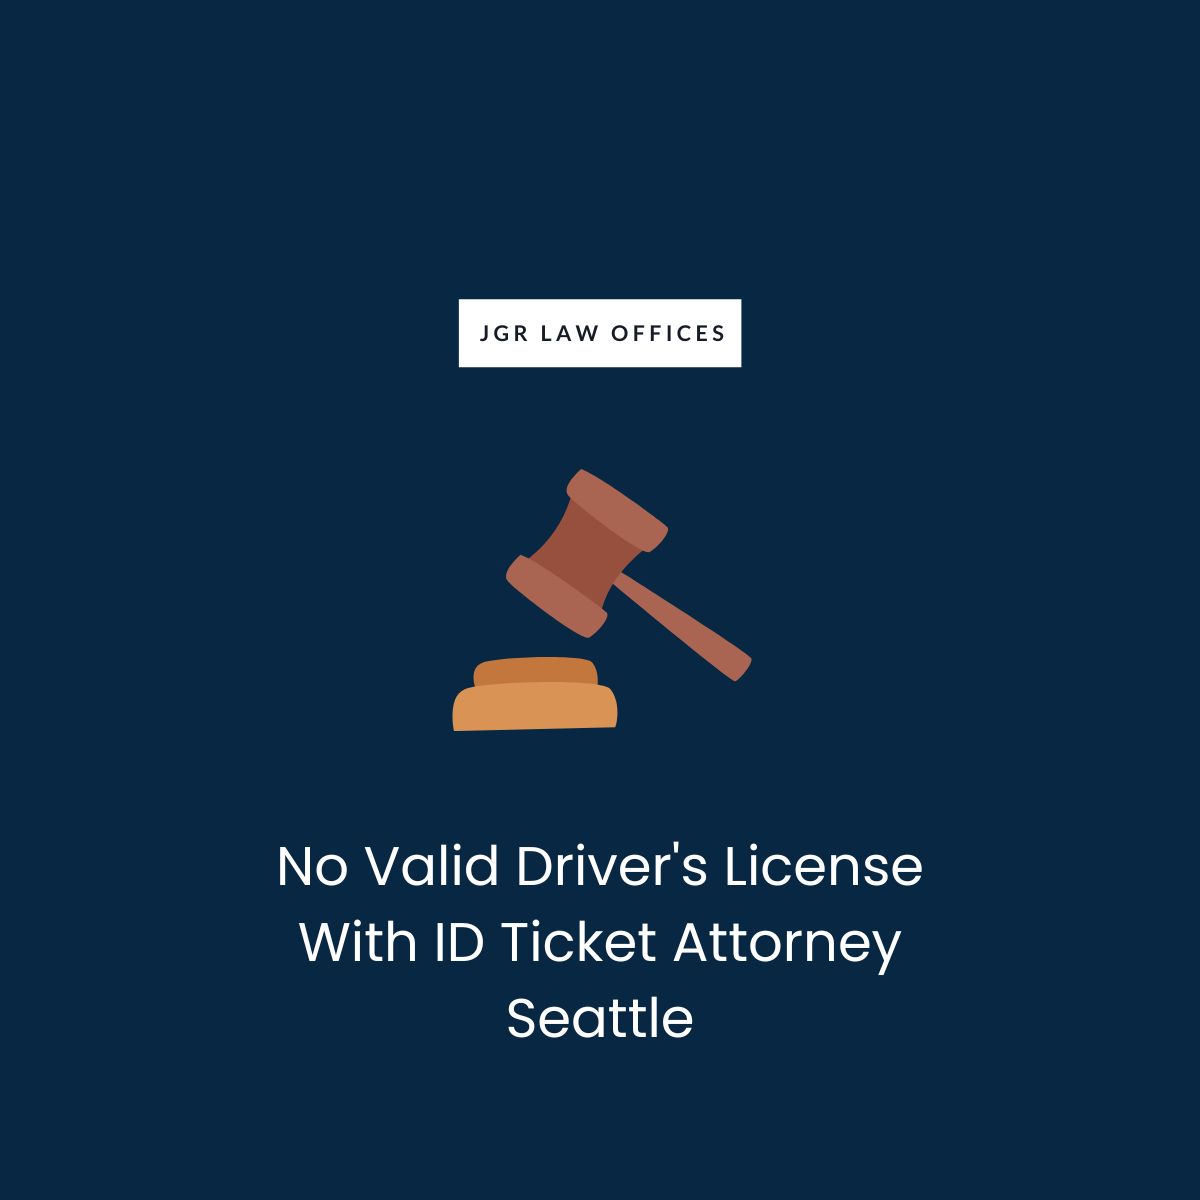 No Valid Driver's License With ID Ticket Lawyer Seattle